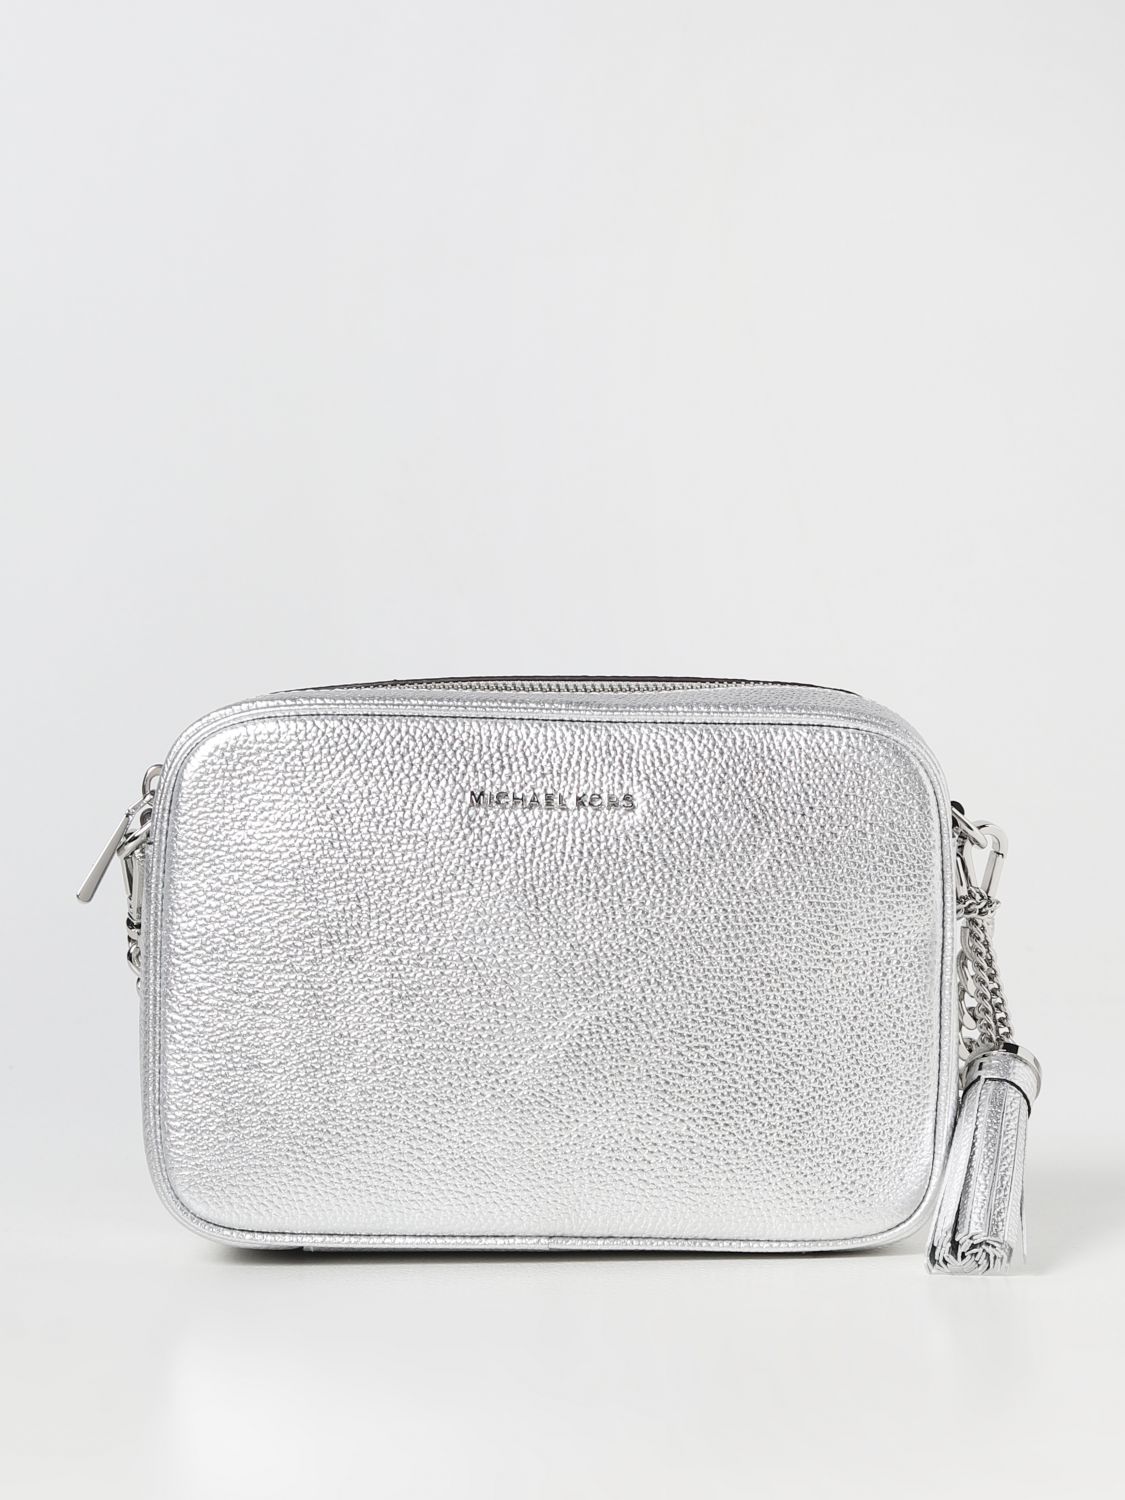 MICHAEL KORS: Michael bag grained laminated leather Silver | Michael Kors crossbody bags online at GIGLIO.COM